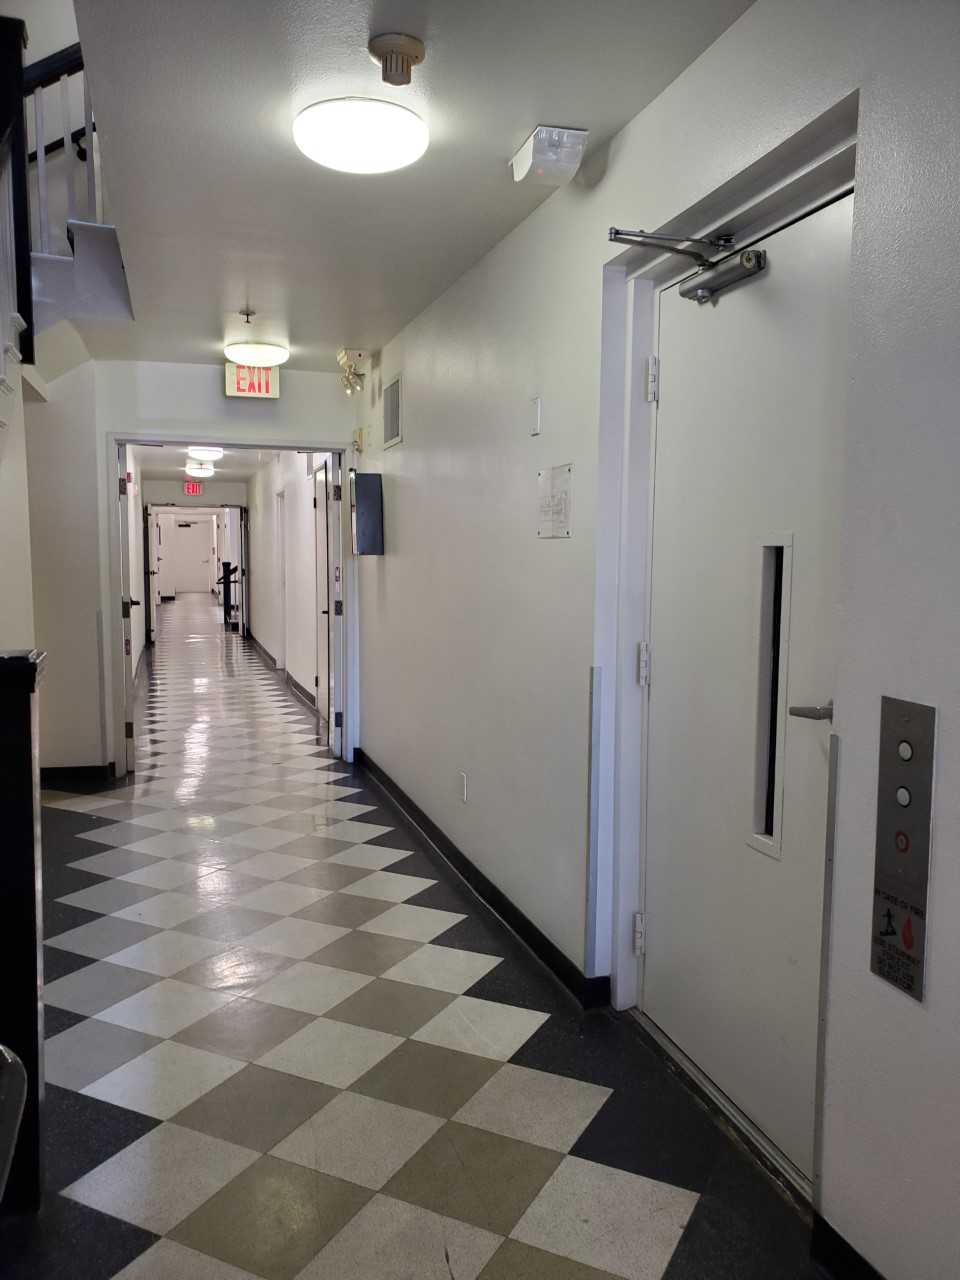 View of a large hallway on a ground floor. There is an elevator on on one side, and a stair case across from it.